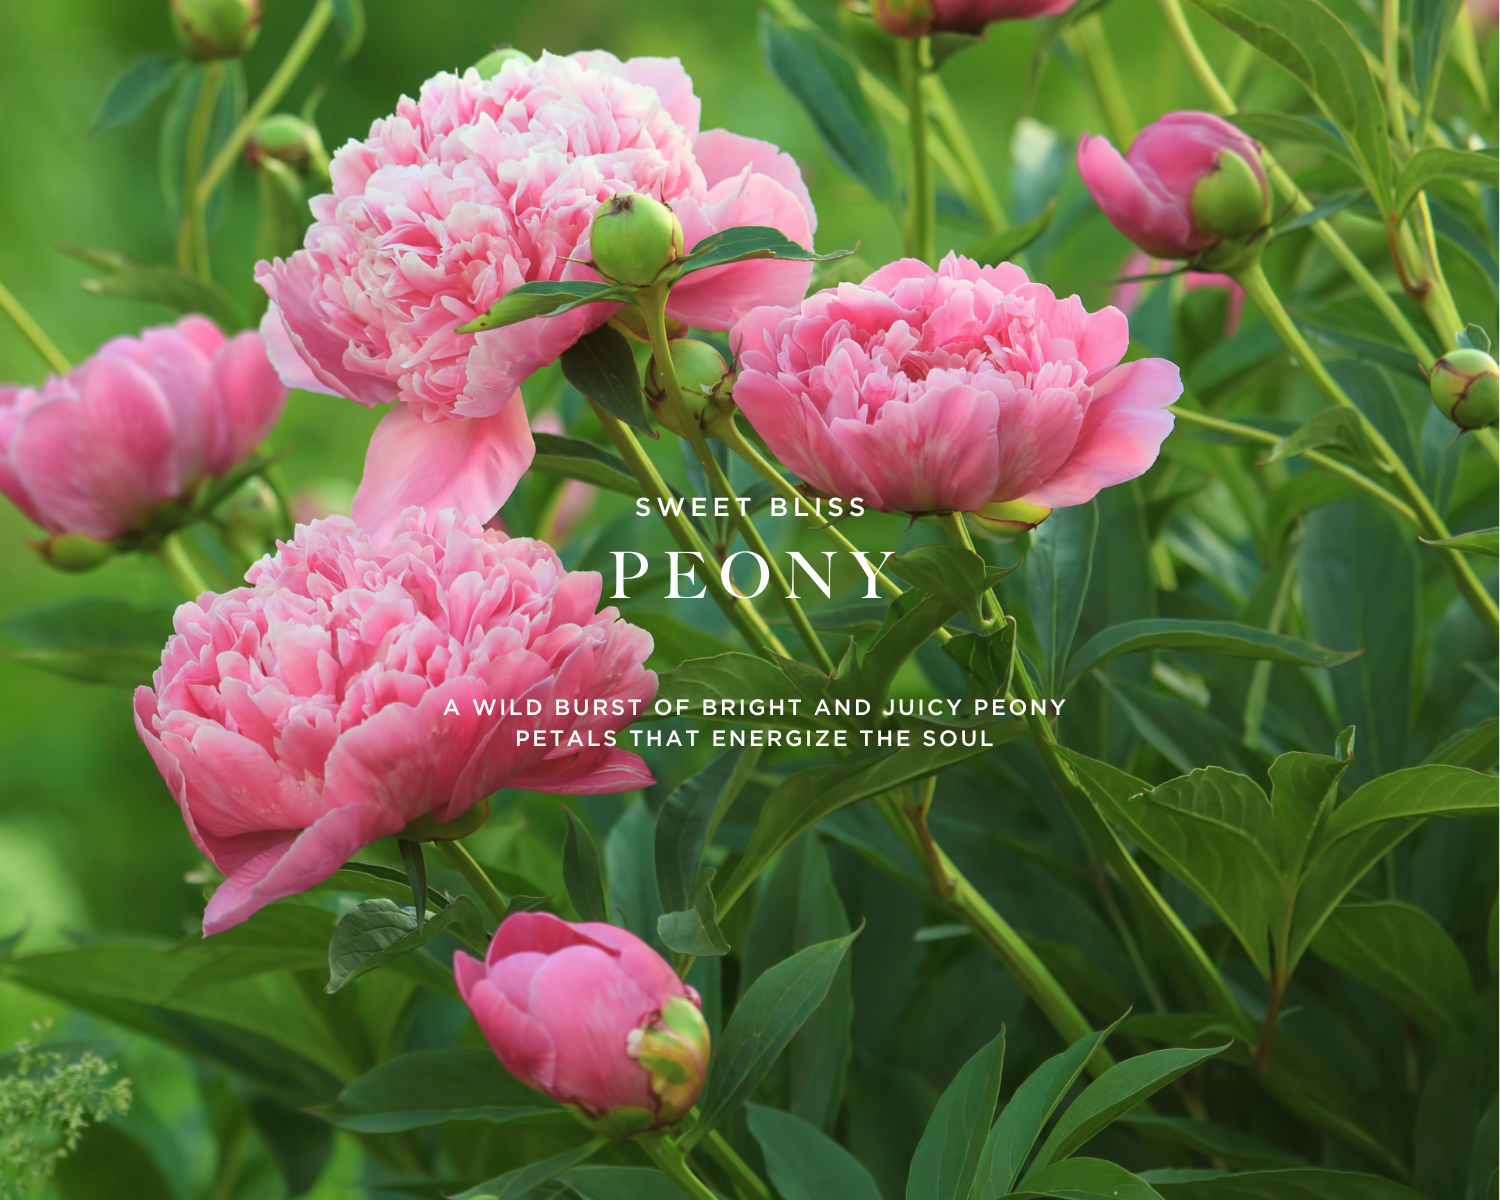 Caswell-Massey Peony Perfume for Women: image of pink peonies representing the main scent note